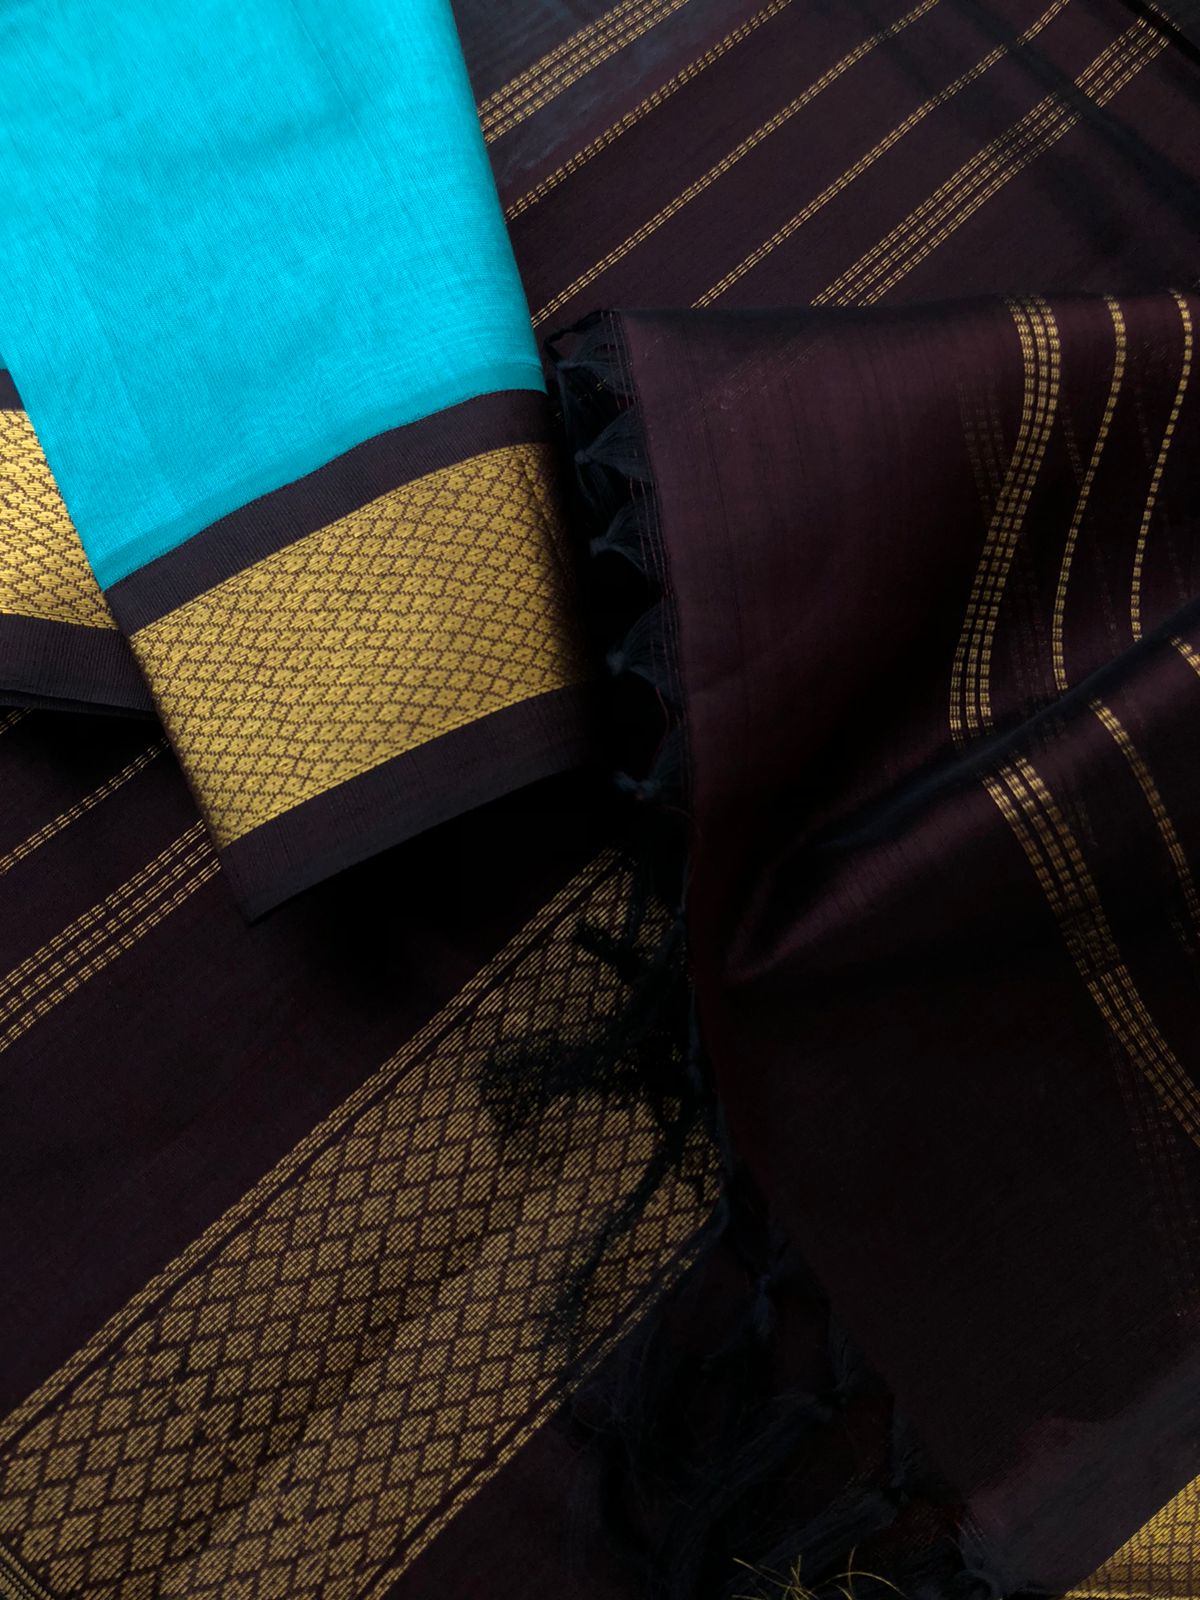 Korvai Silk Cotton - teal blue and coffee bean brown